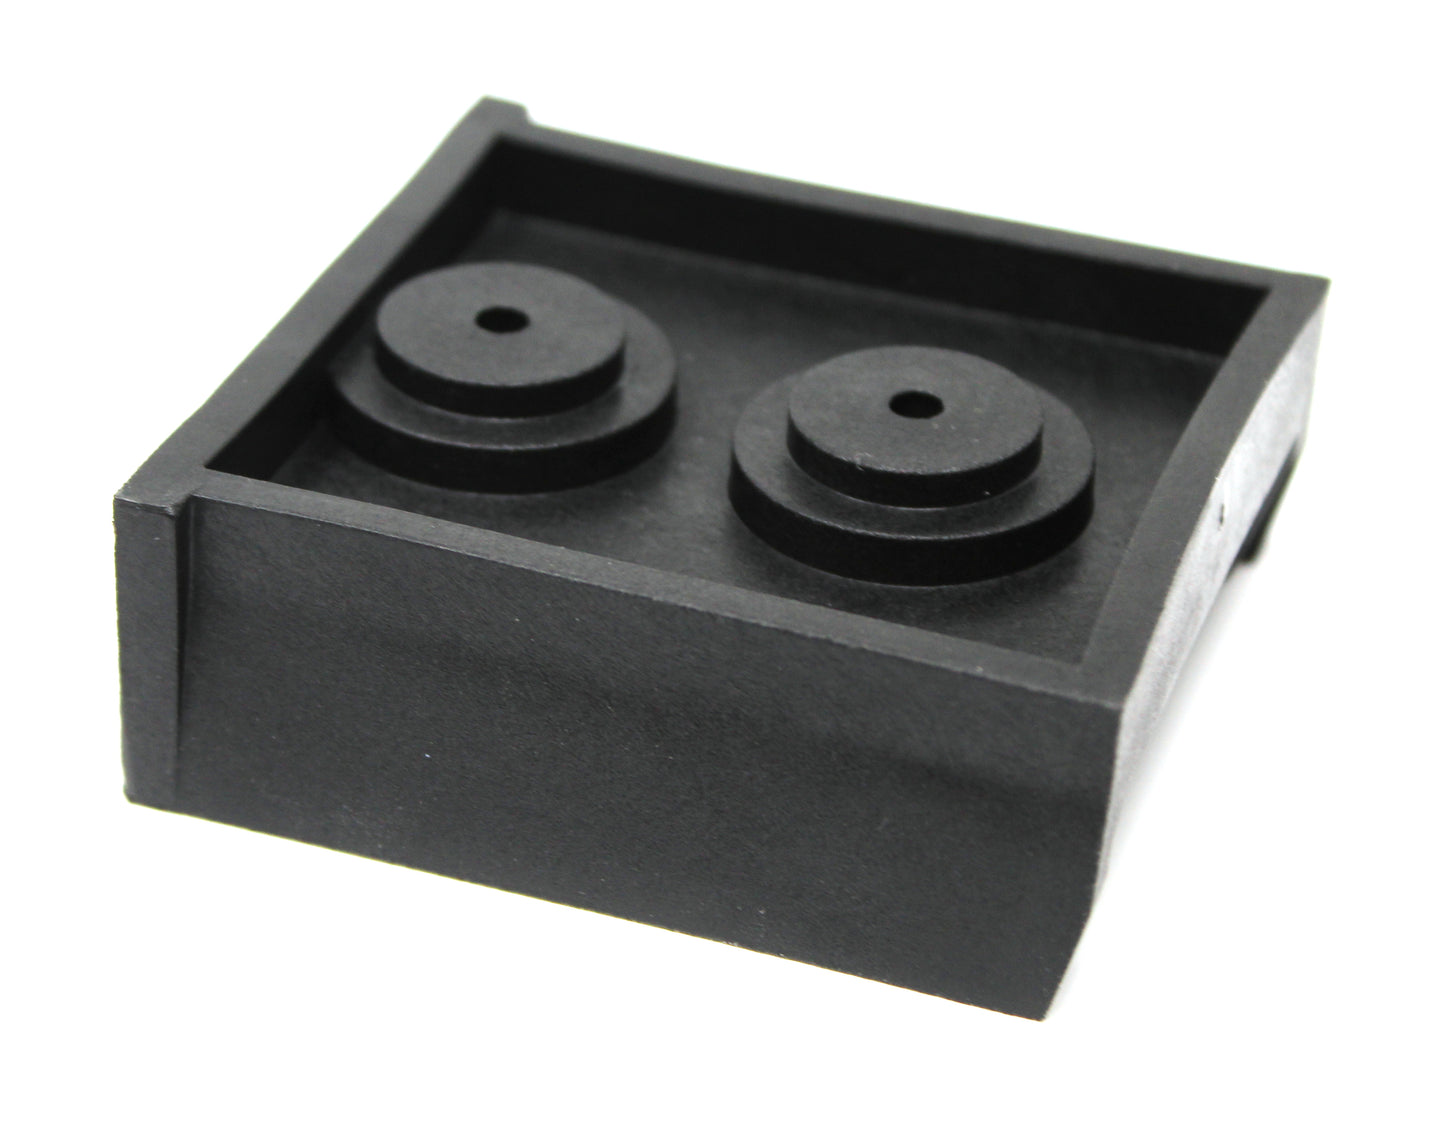 Plastic M18 Battery Holder Wall Mount with Screw Holes Compatible with Milwaukee M18 Batteries